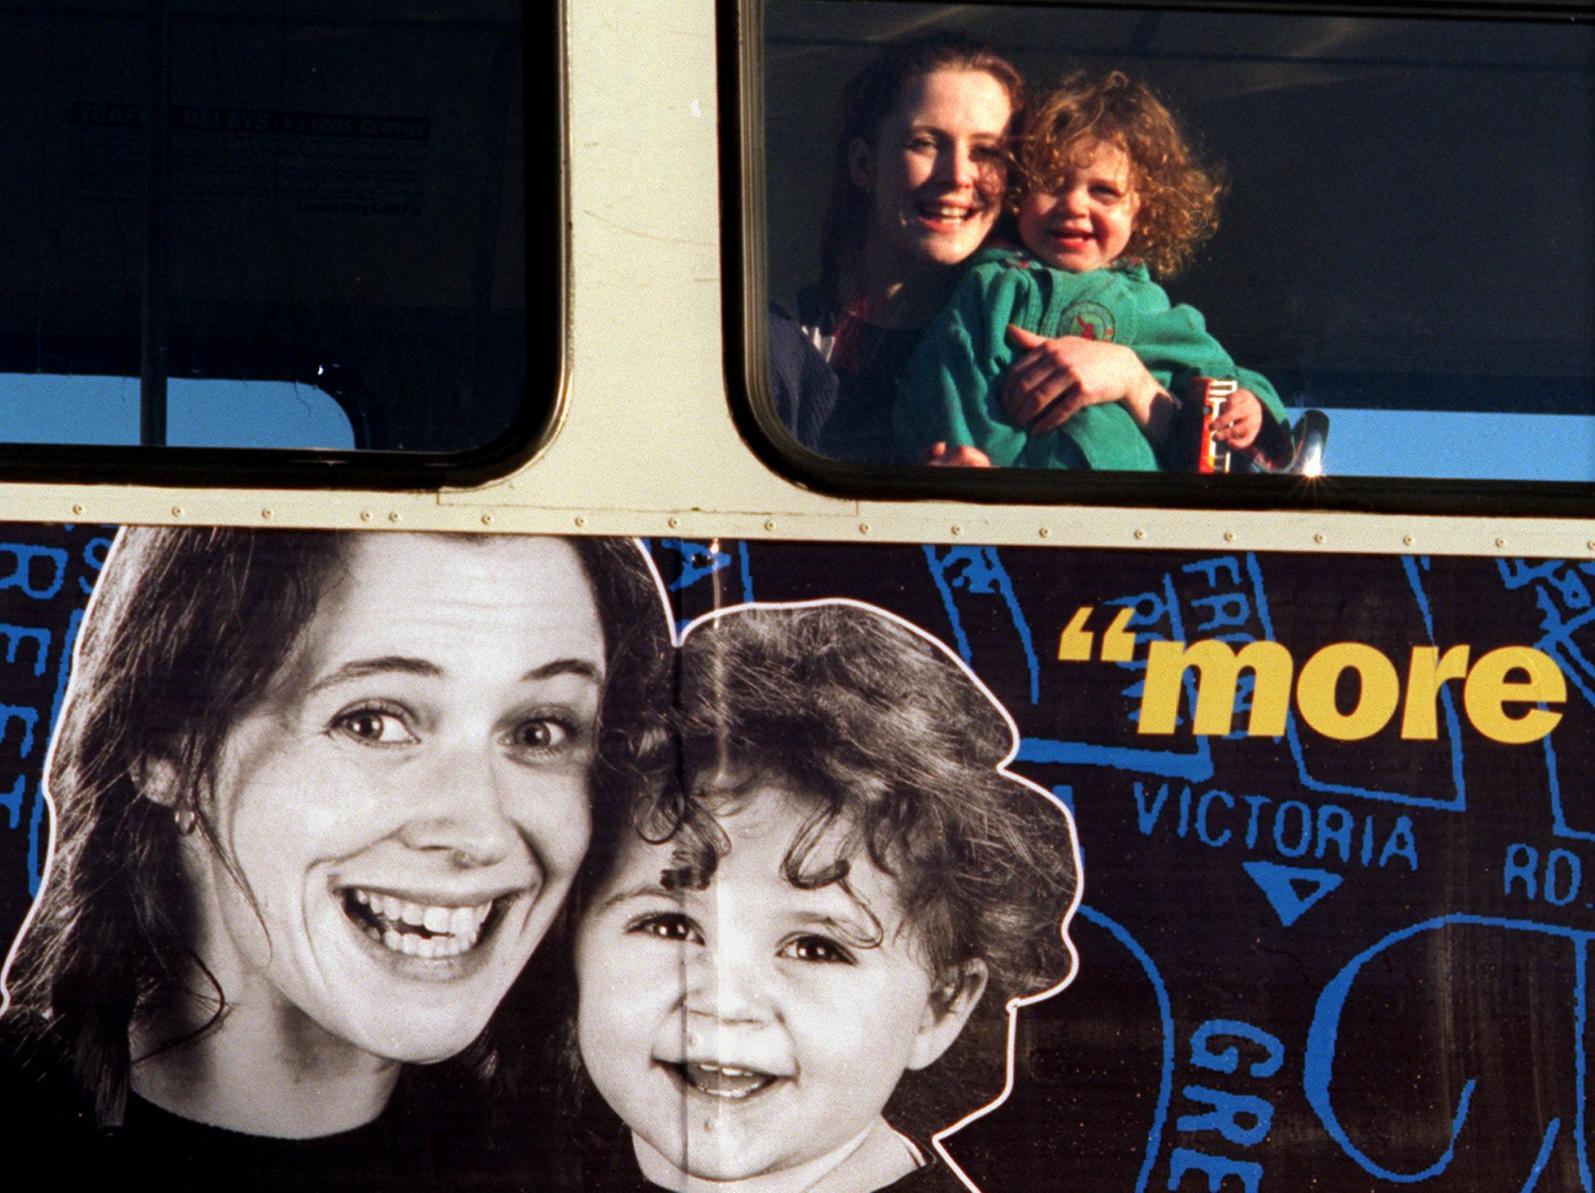 Leeds residents appeared on the sides City Link buses under the City Council's Vision for Leeds scheme in which people  were being asked what they would like to see happen in the city. Pictured is Sarah Ritson and daughter Isobel.